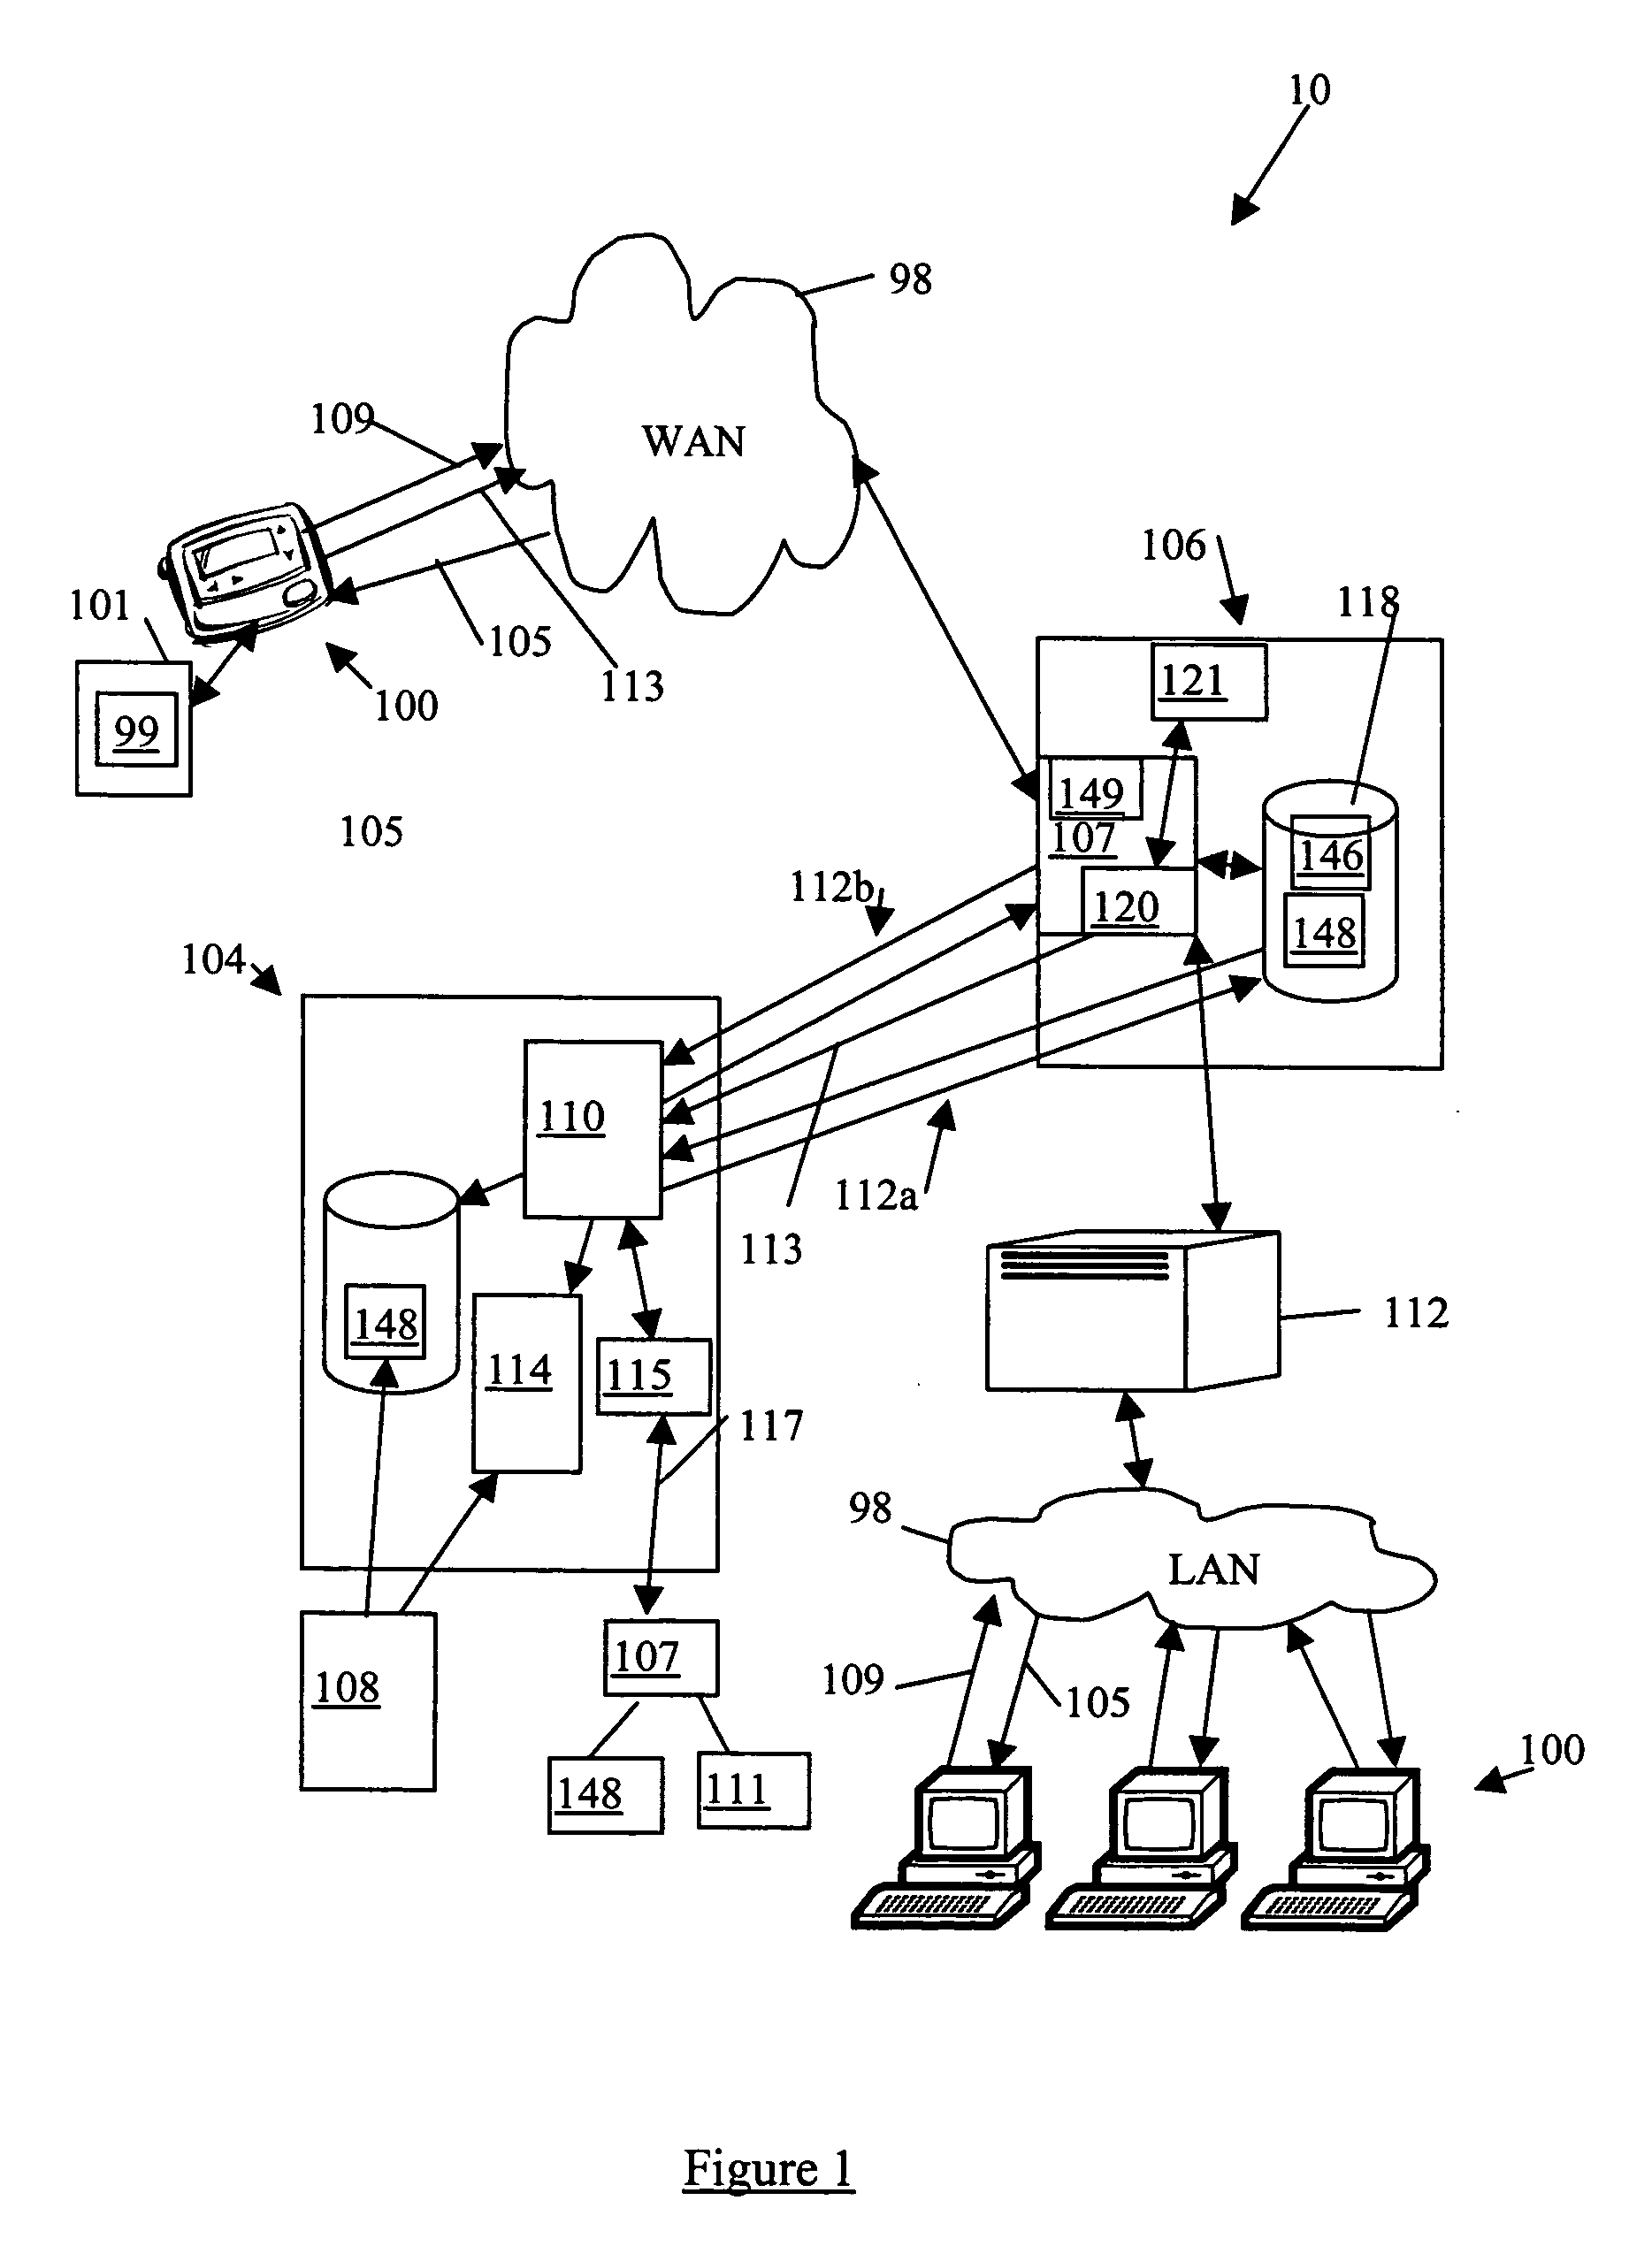 System and method configuring contextual based content with published content for display on a user interface